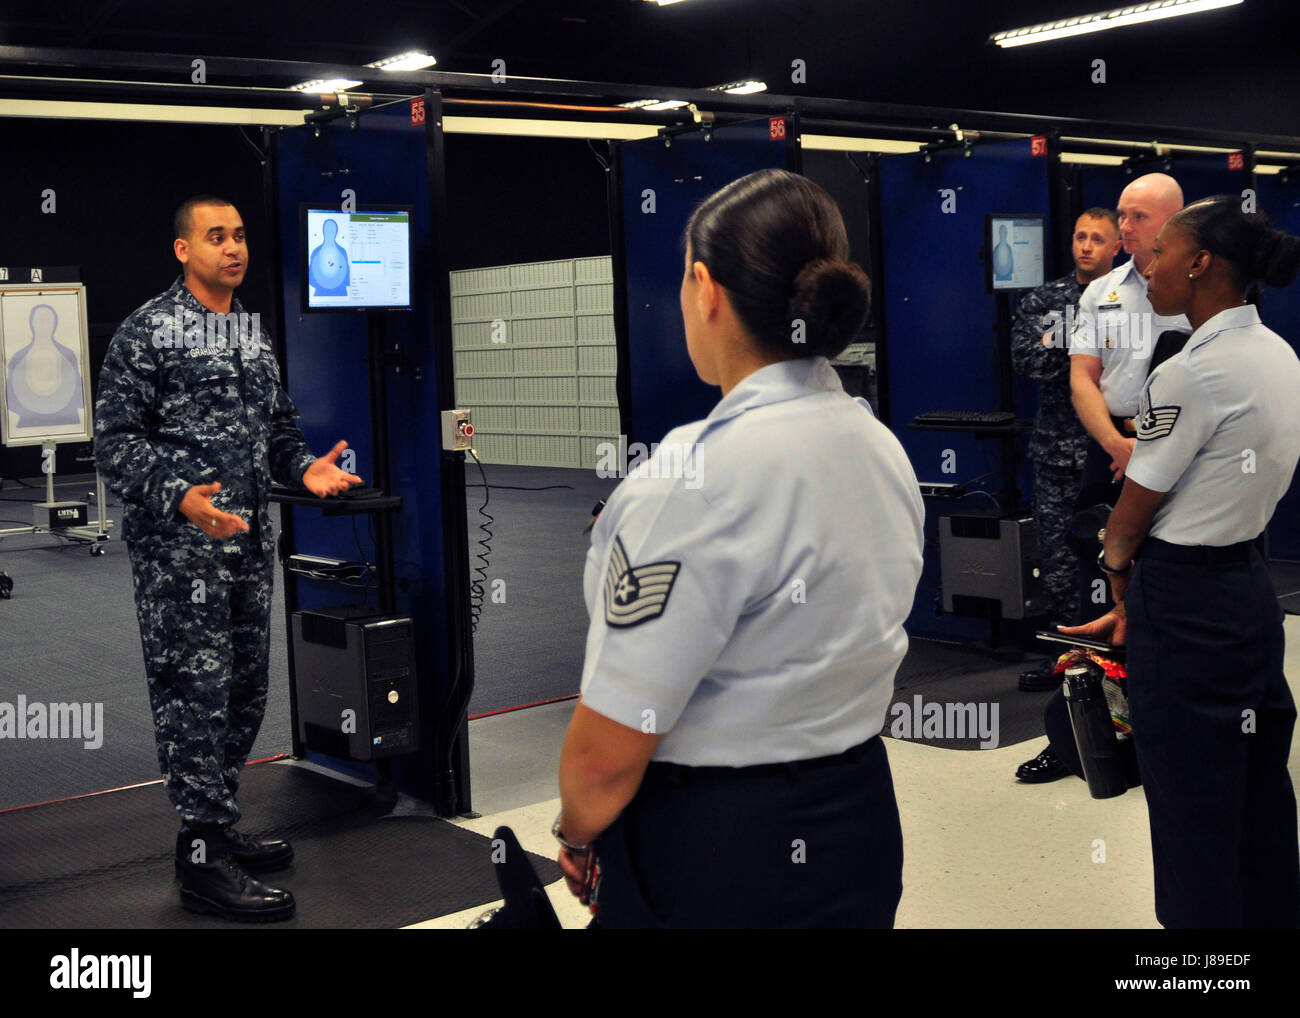 170317-N-ZF693-033  GREAT LAKES Ill. (May 17,2017) Fire Controlman 1st Class Brandon Graham disscusses the weapon training of Navy recruits to members of the 2017 Drill Instructor Summit at the USS Missouri small arms marksmanship trainer onboard Recruit Training Command (RTC). Drill Instructors from each branch of the military gathered together during the summit to tour RTC, exchange ideas, and identify training practices to benefit enlisted personnel across the services. (U.S. Navy photo by Mass Communication Specialist 3rd Class Ivana Campbell/Released) Stock Photo